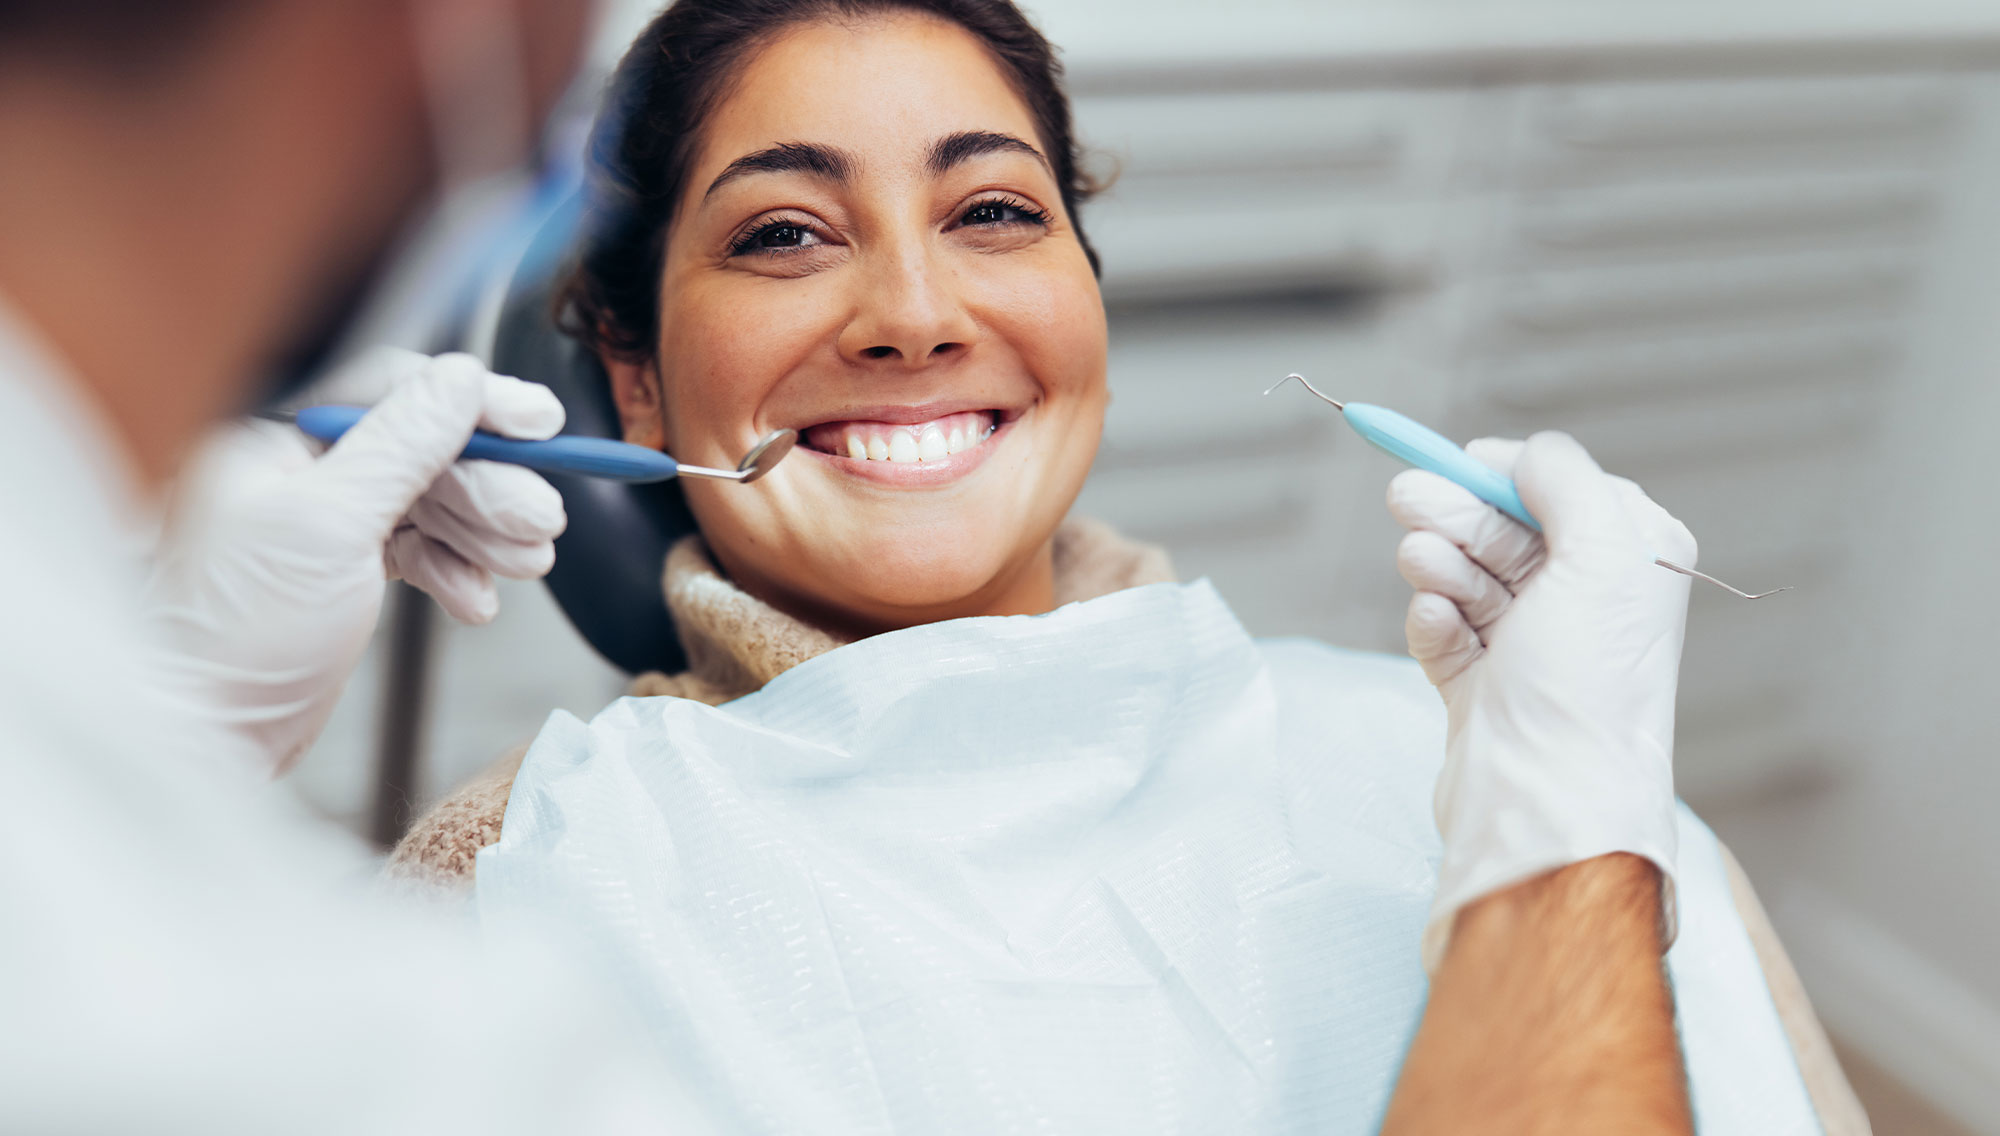 Pretty young smiling woman sitting in dental chair at dental clinic while dentist fixing her teeth